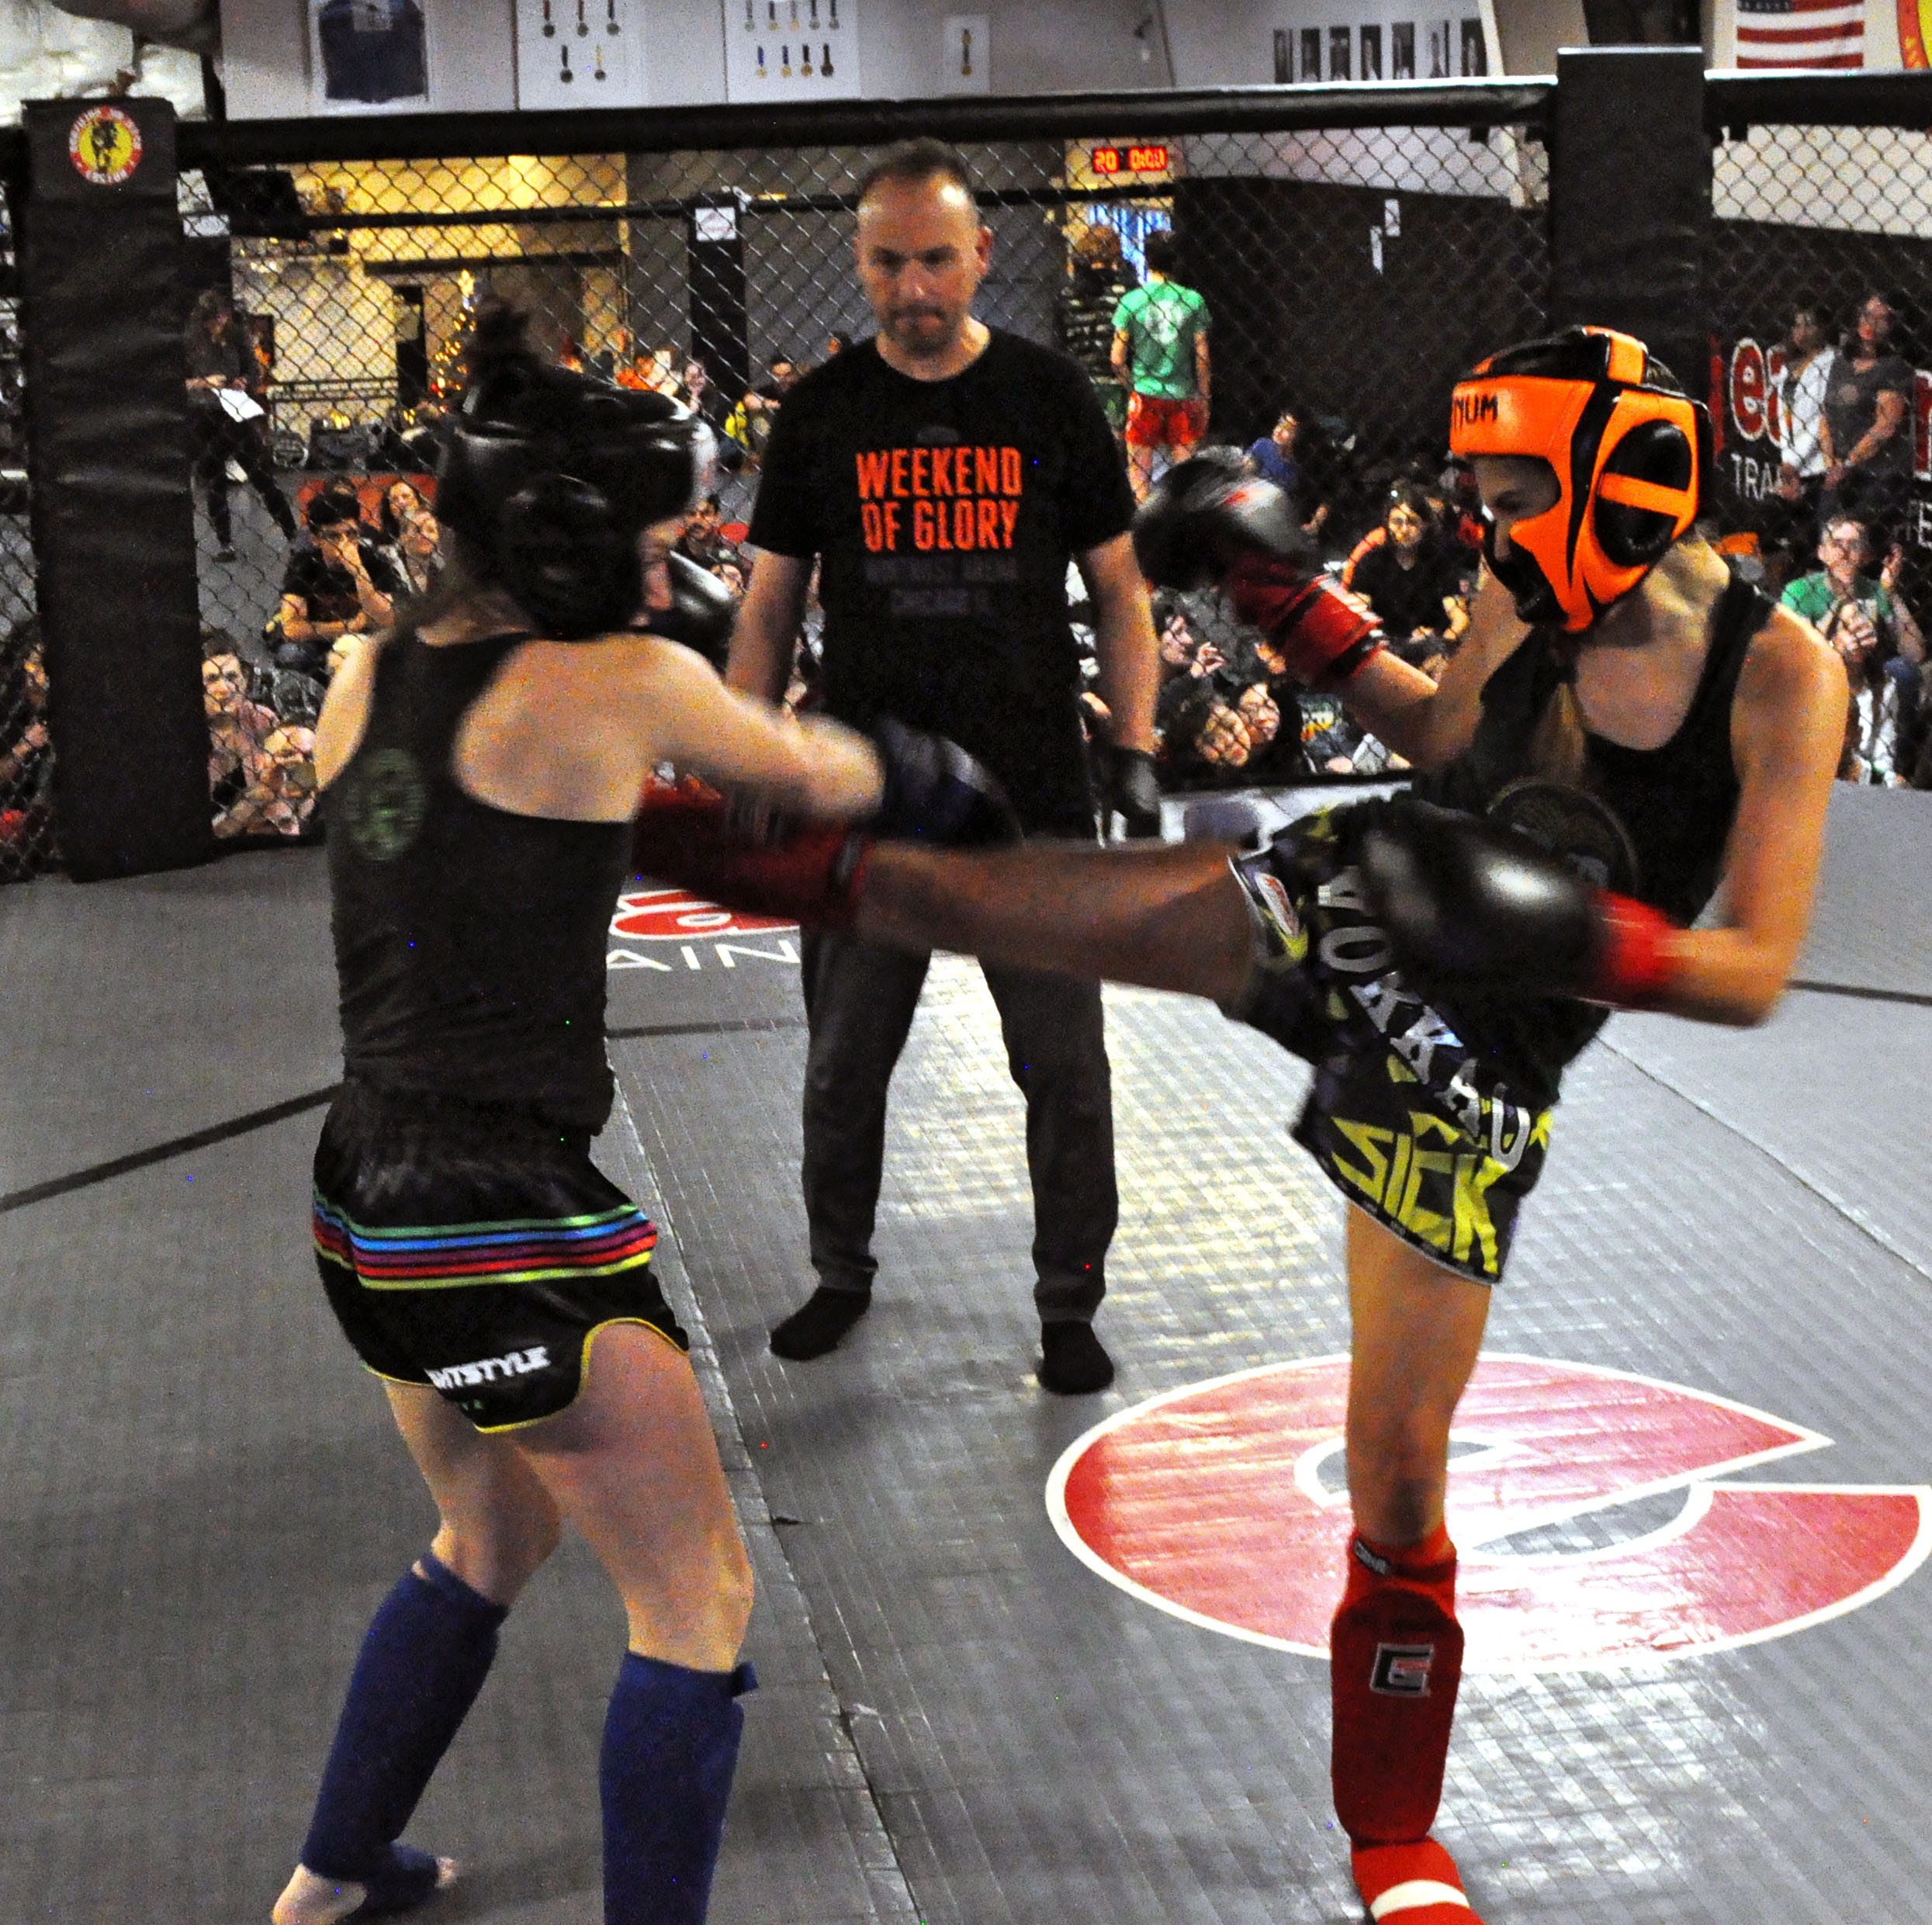 Two women wearing protective gear in the Easton Muay Thai smoker. One kicks the other while a coach looks on.